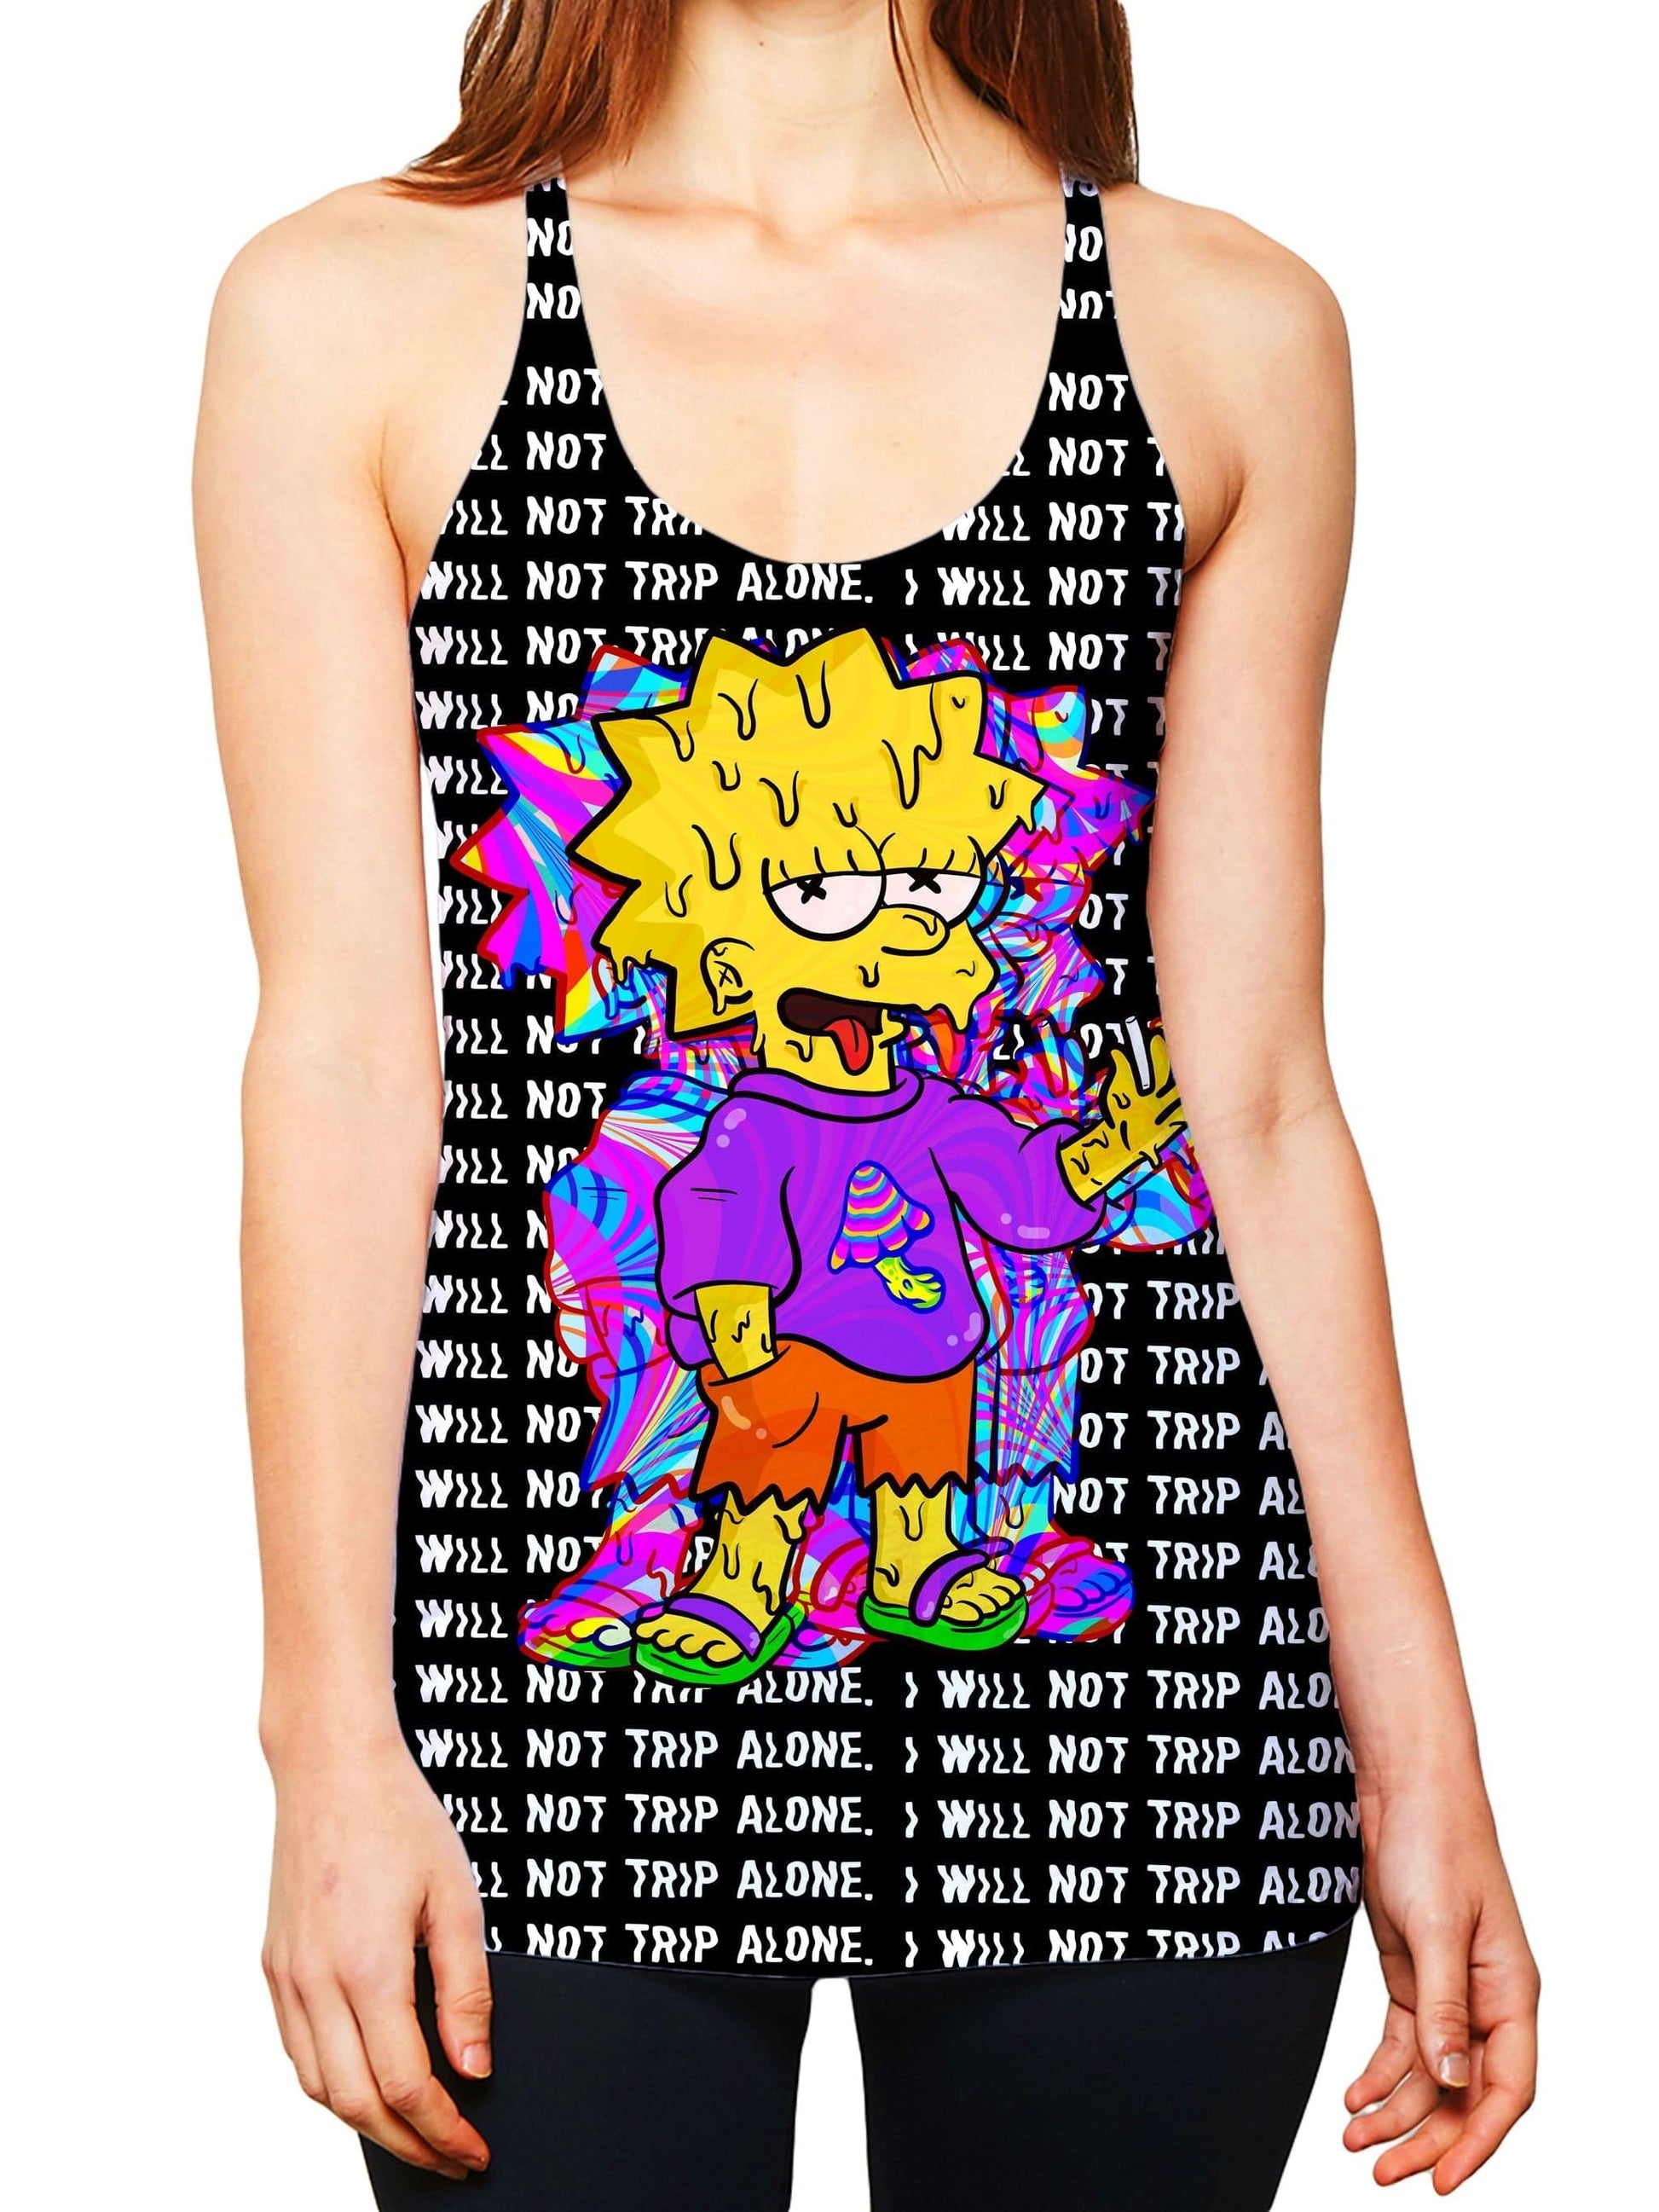 Tripping with Her Women's Tank, Noctum X Truth, | iEDM